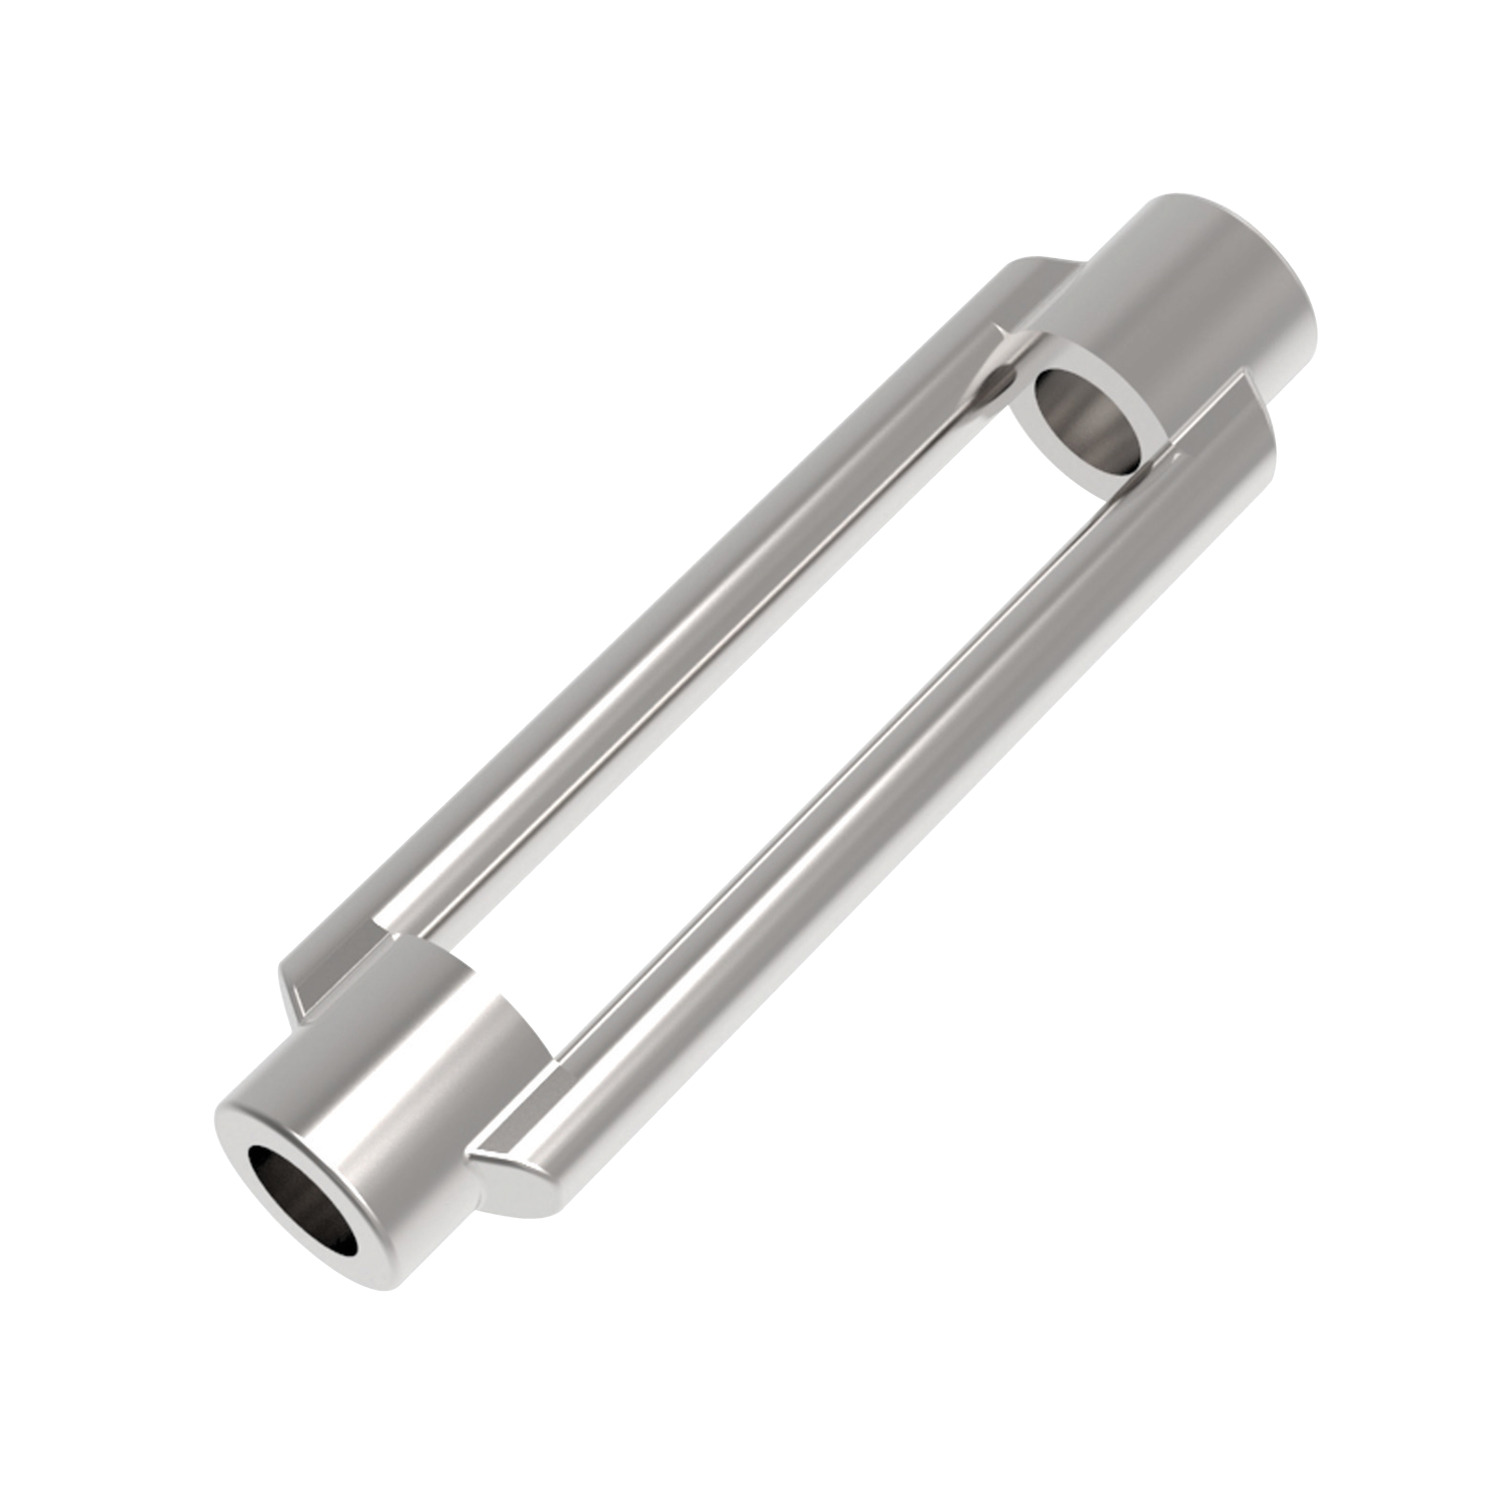 Turnbuckles Zinc-plated steel turnbuckles manufactured to DIN 1480. Sizes range from M6 to M56. Lengths from 110mm to 355mm.